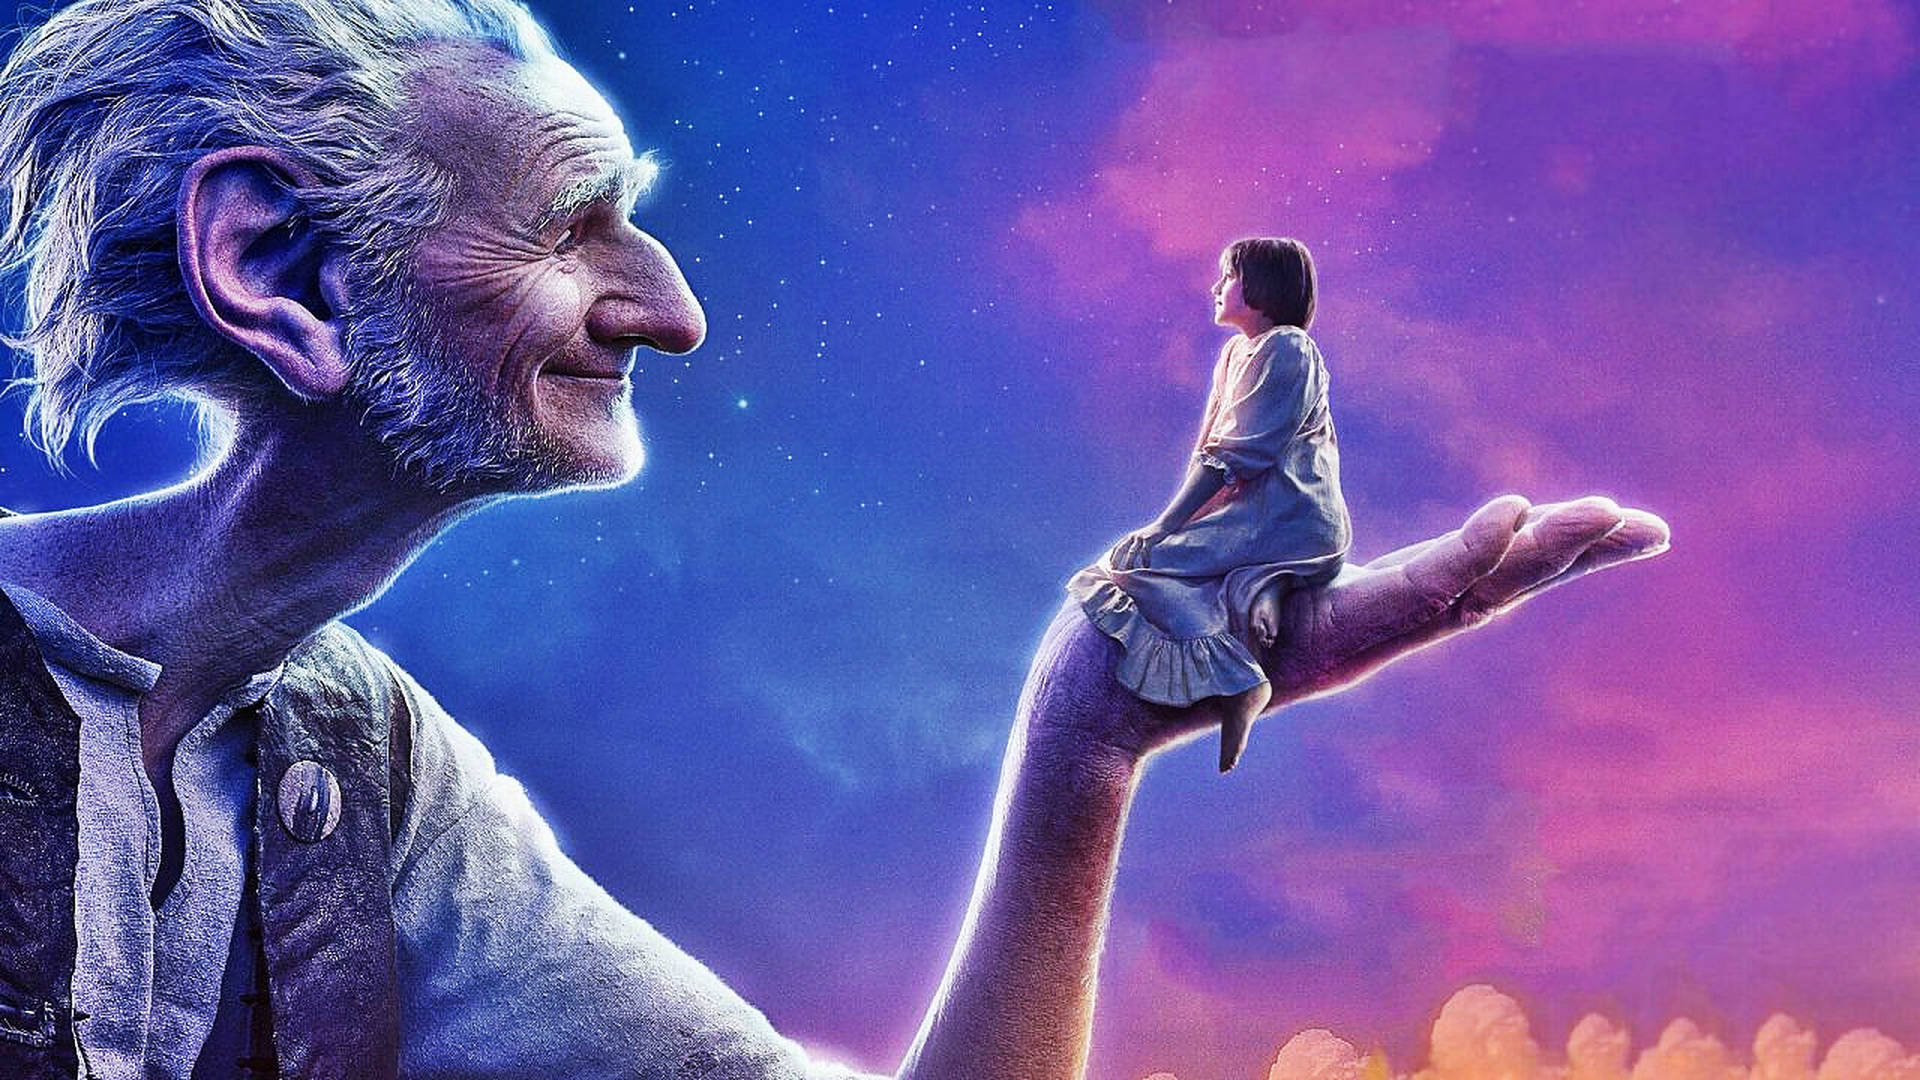 "The BFG Staring at the Gradient Sky" Wallpaper